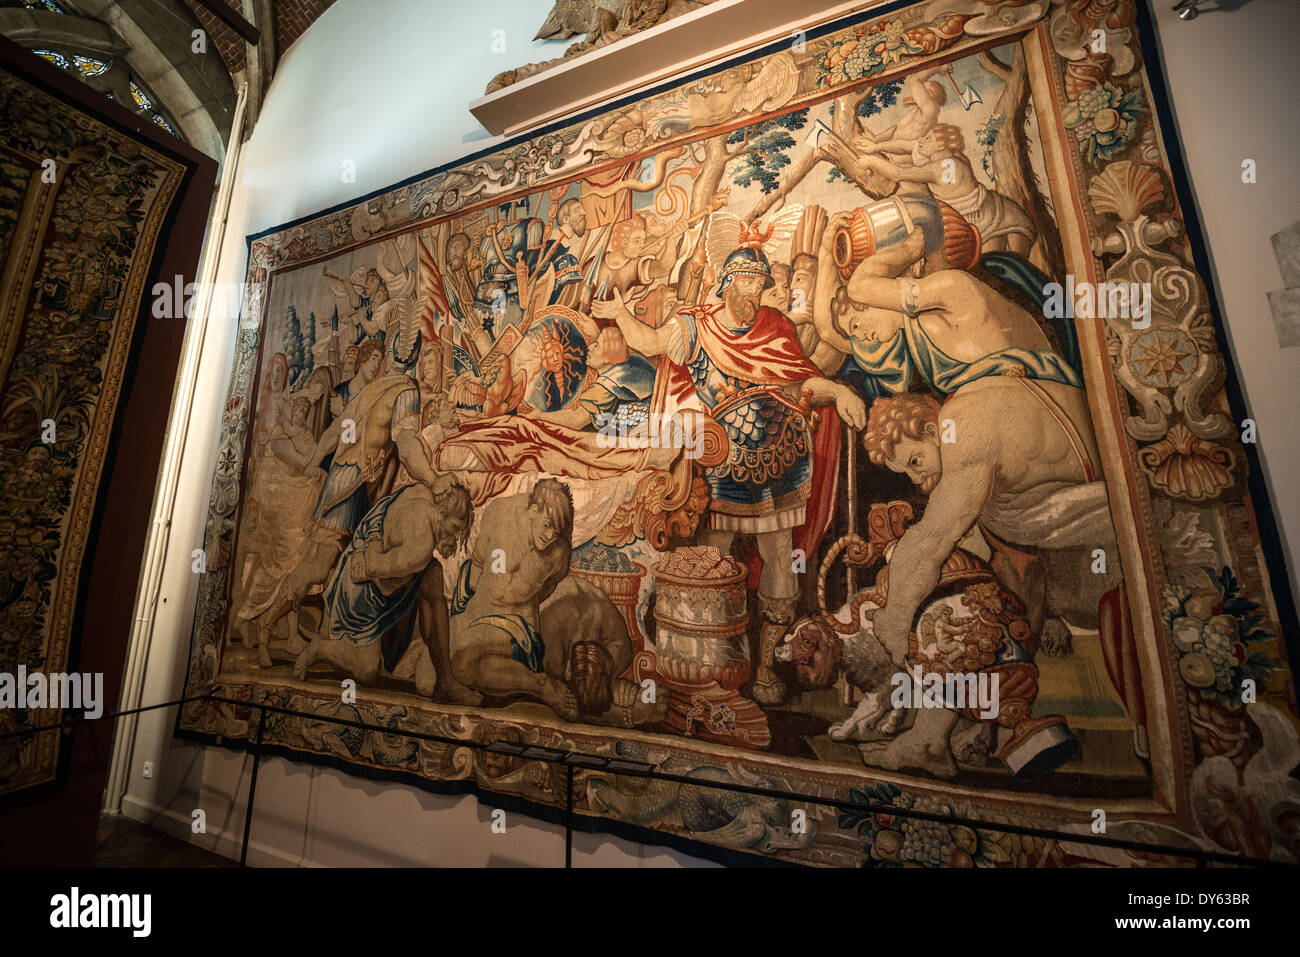 A 17th century baroque tapestry on display at the Museum of the City of Brussels. The museum is dedicated to the history and folklore of the town of Brussels, its development from its beginnings to today, which it presents through paintings, sculptures, tapistries, engravings, photos and models. Stock Photo